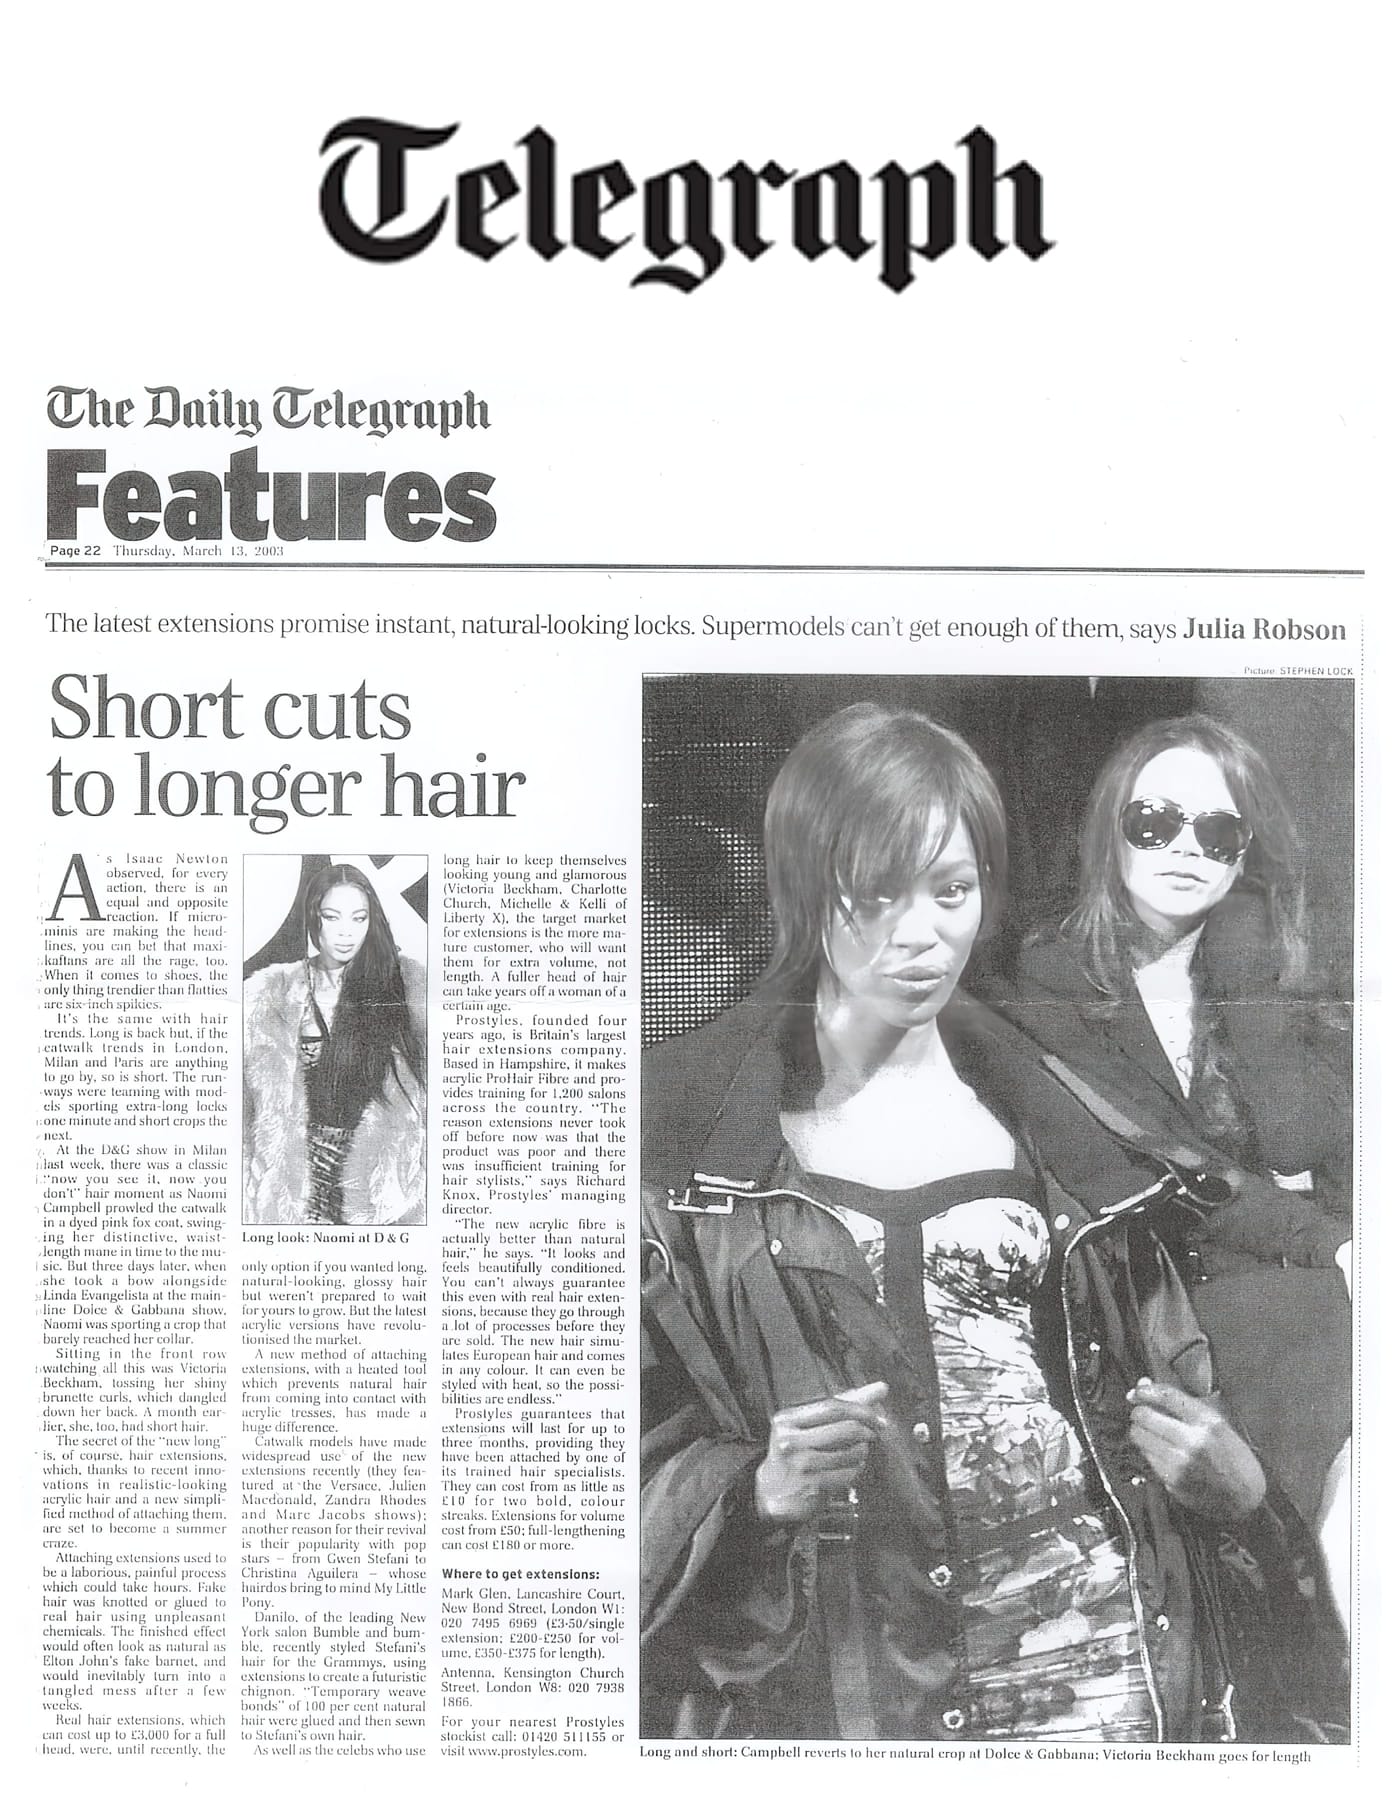 Celebrity hair extensions in The Daily Telegraph